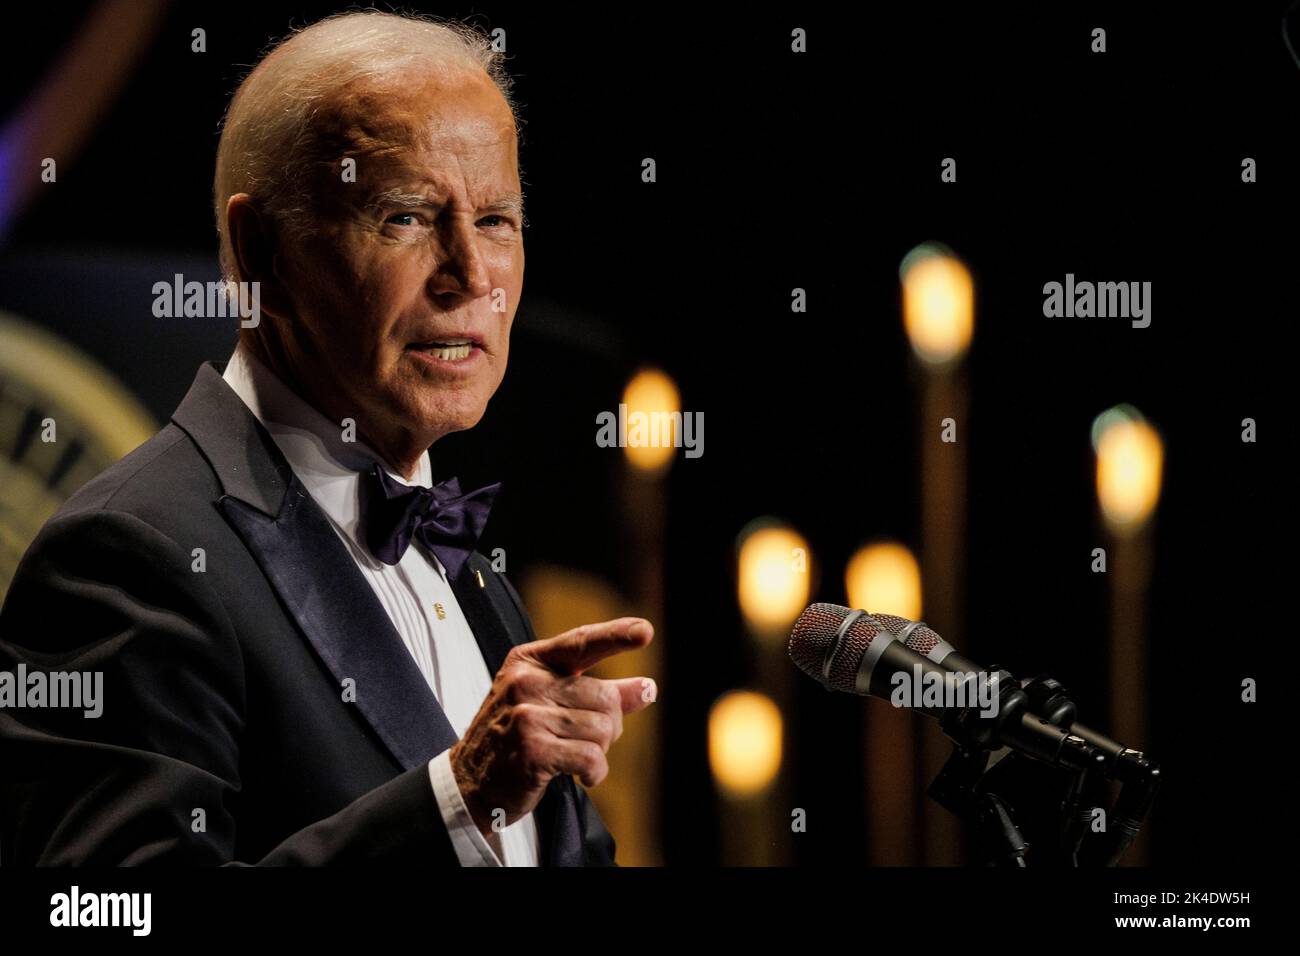 Washington, DC, USA. 1st Oct, 2022. United States President Joe Biden speaks at the Phoenix Awards Dinner in Washington, DC, US, on Saturday, October 1, 2022. The Biden administration this week was accused in a lawsuit by six Republican-led states of overstepping its authority with a plan to forgive federal student loans. Credit: Samuel Corum/Pool via CNP/dpa/Alamy Live News Stock Photo